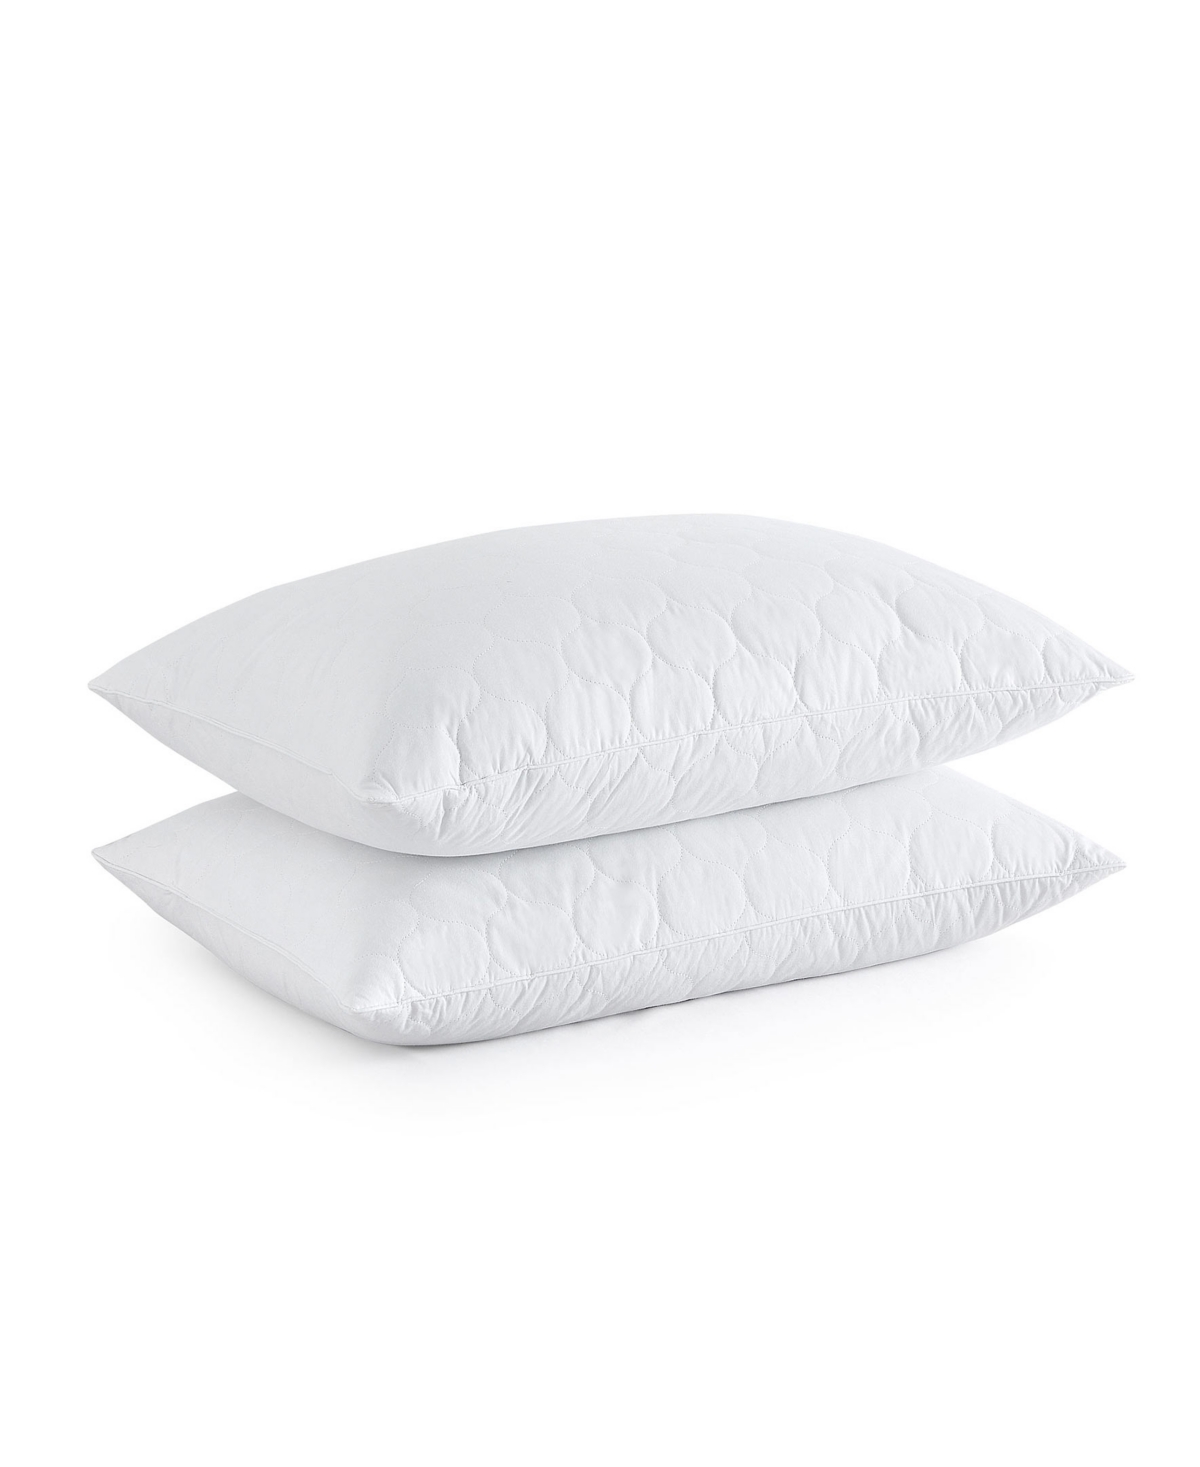 Unikome Teardrop Quilted Goose Down And Feather Bed Pillows, 2 Piece, Standard/queen In White